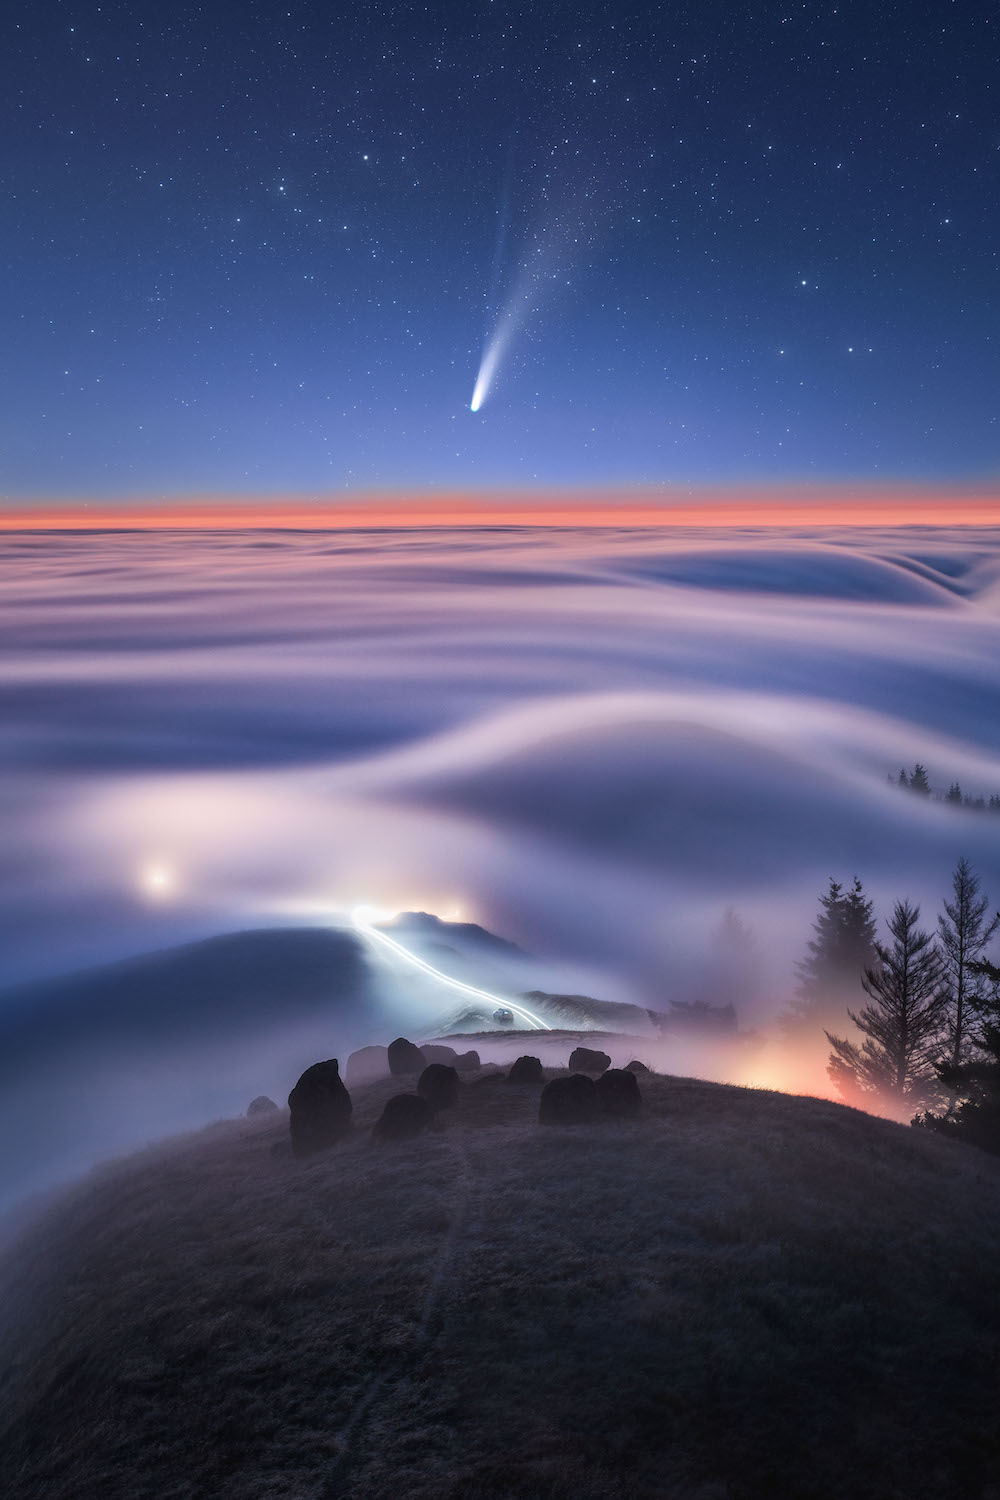 Tanmay Sapkal - Comet NeoWise Setting, won the Photograph of the Year in the International Landscape Photographer of the Year 2021 competition. Image: Tanmay Sapkal/The 8th International Landscape Photographer of the Year competition